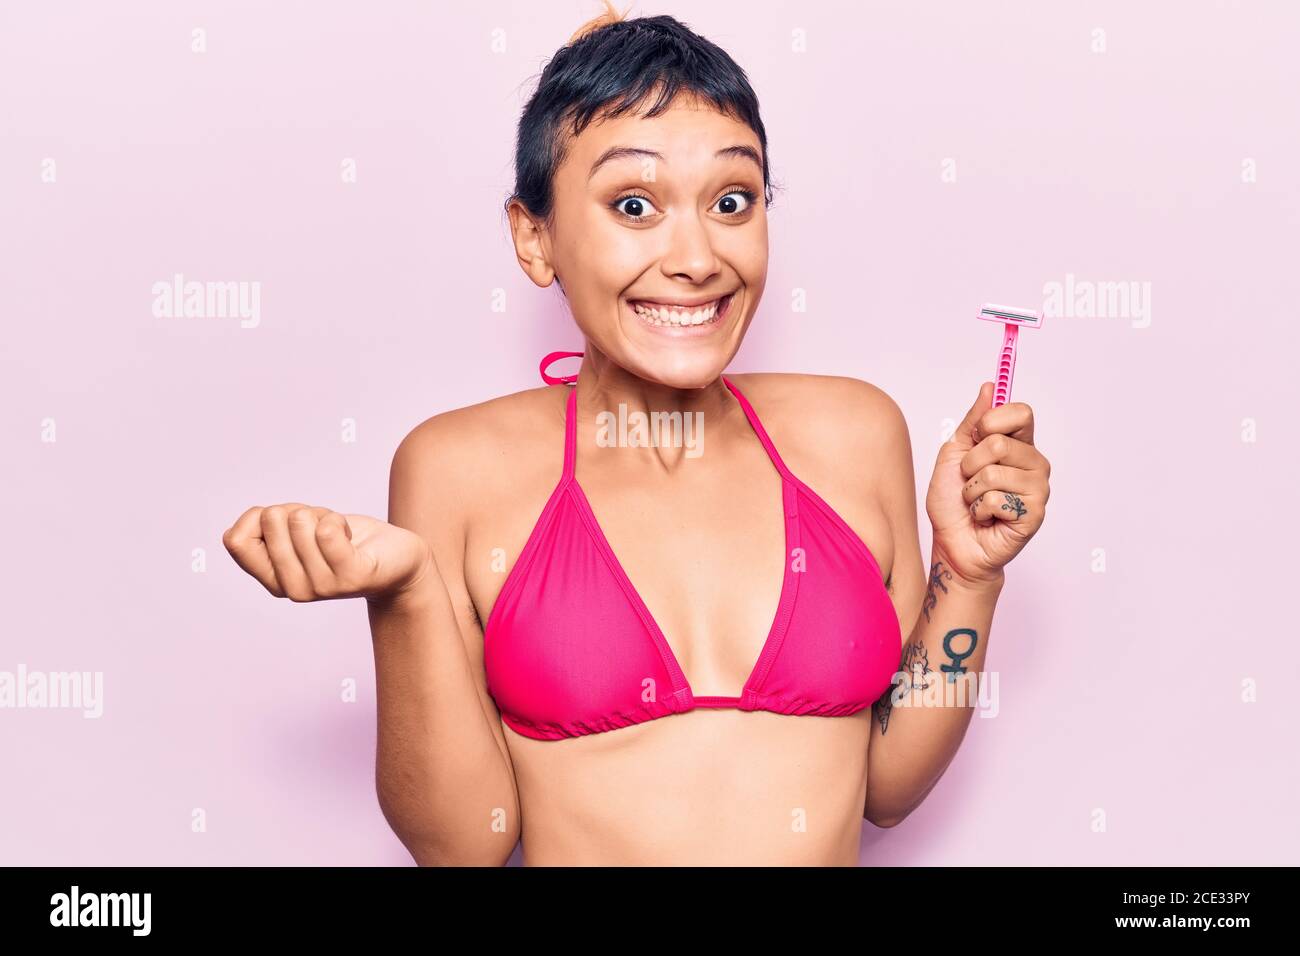 Unshaven young woman smiling cheerfully while wearing a bra and